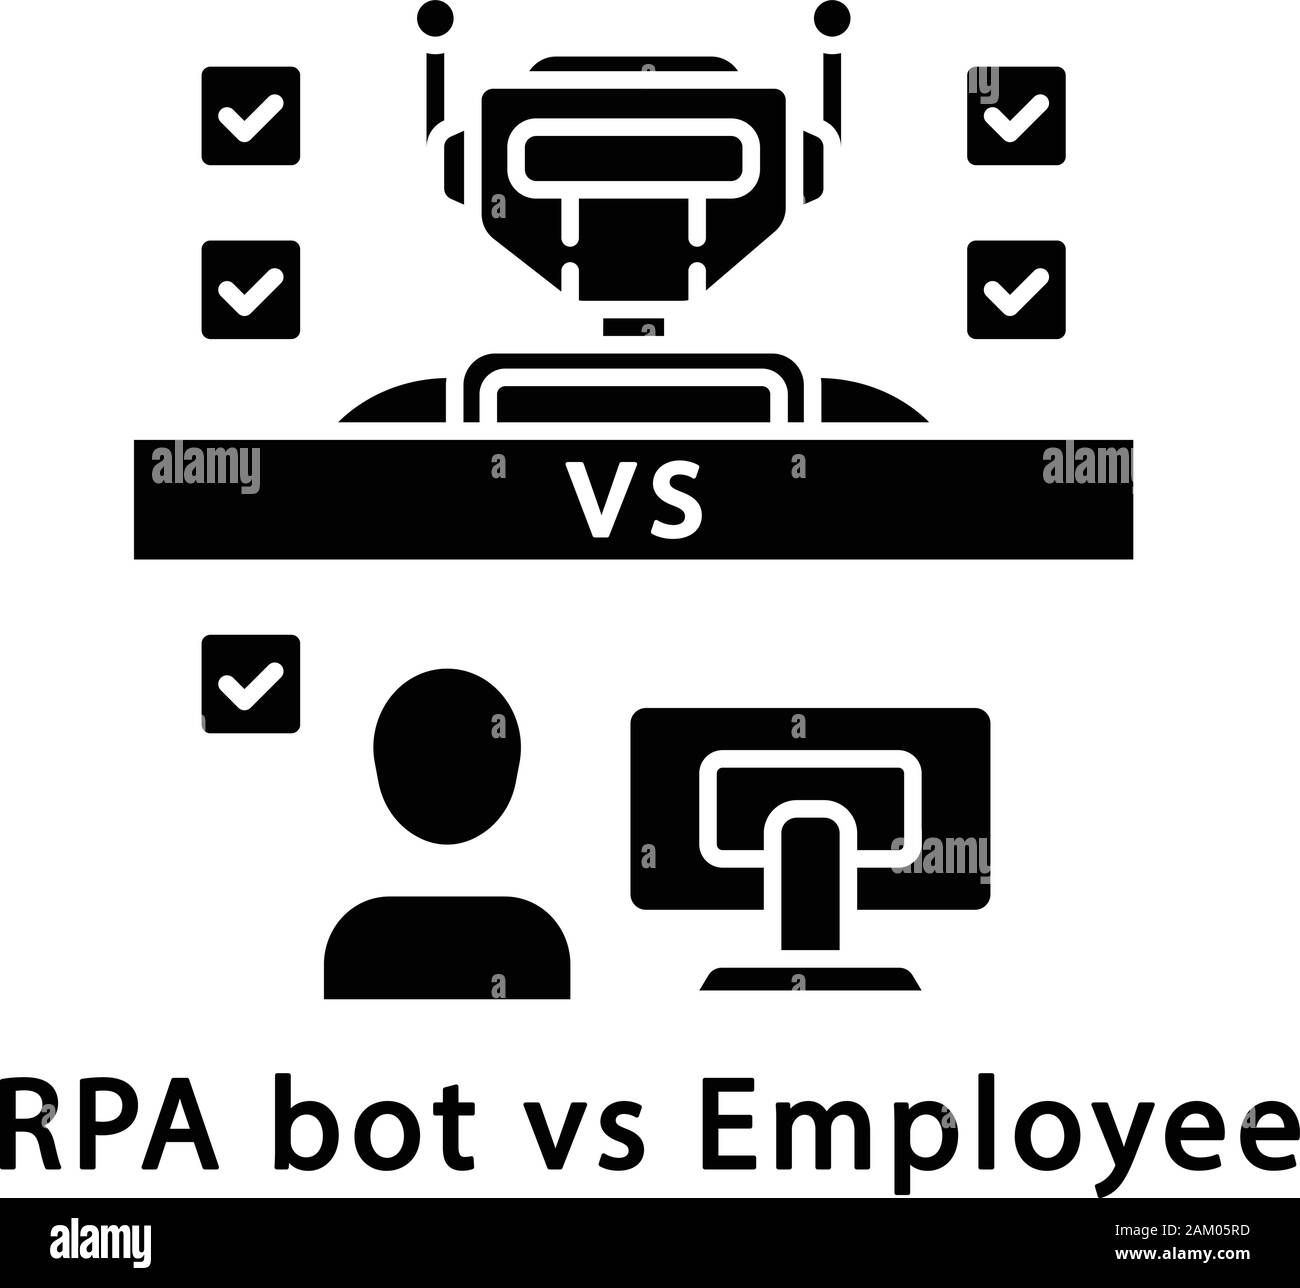 RPA bot vs employee glyph icon. Benefits of using robots. Modern technologies vs traditional work. Robotic process automation. Silhouette symbol. Nega Stock Vector